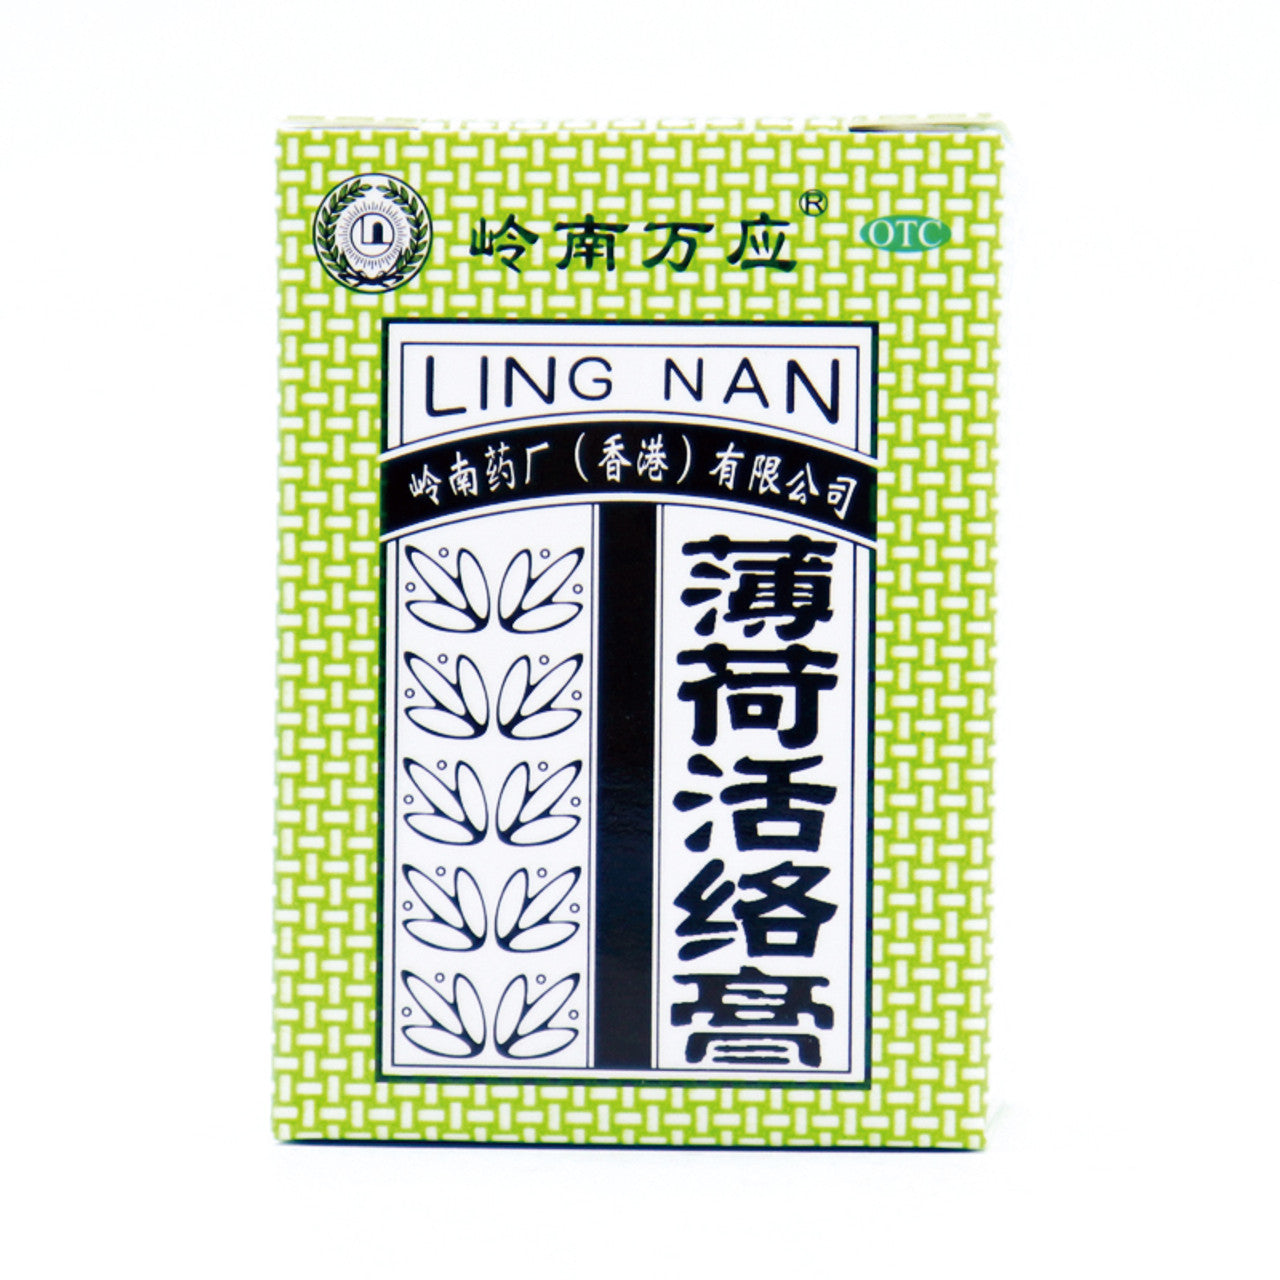 Chinese Herbs Ointment. Brand LING NAN WAN YING. Bohe Huoluo Gao or Bohe Huoluo Ointment or BO HE HUO LUO GAO or Bohe Huoluo Cream For r muscle fatigue, bone aches, bruises, rheumatism and bone pain, motion sickness, colds, headaches, and insect bites.